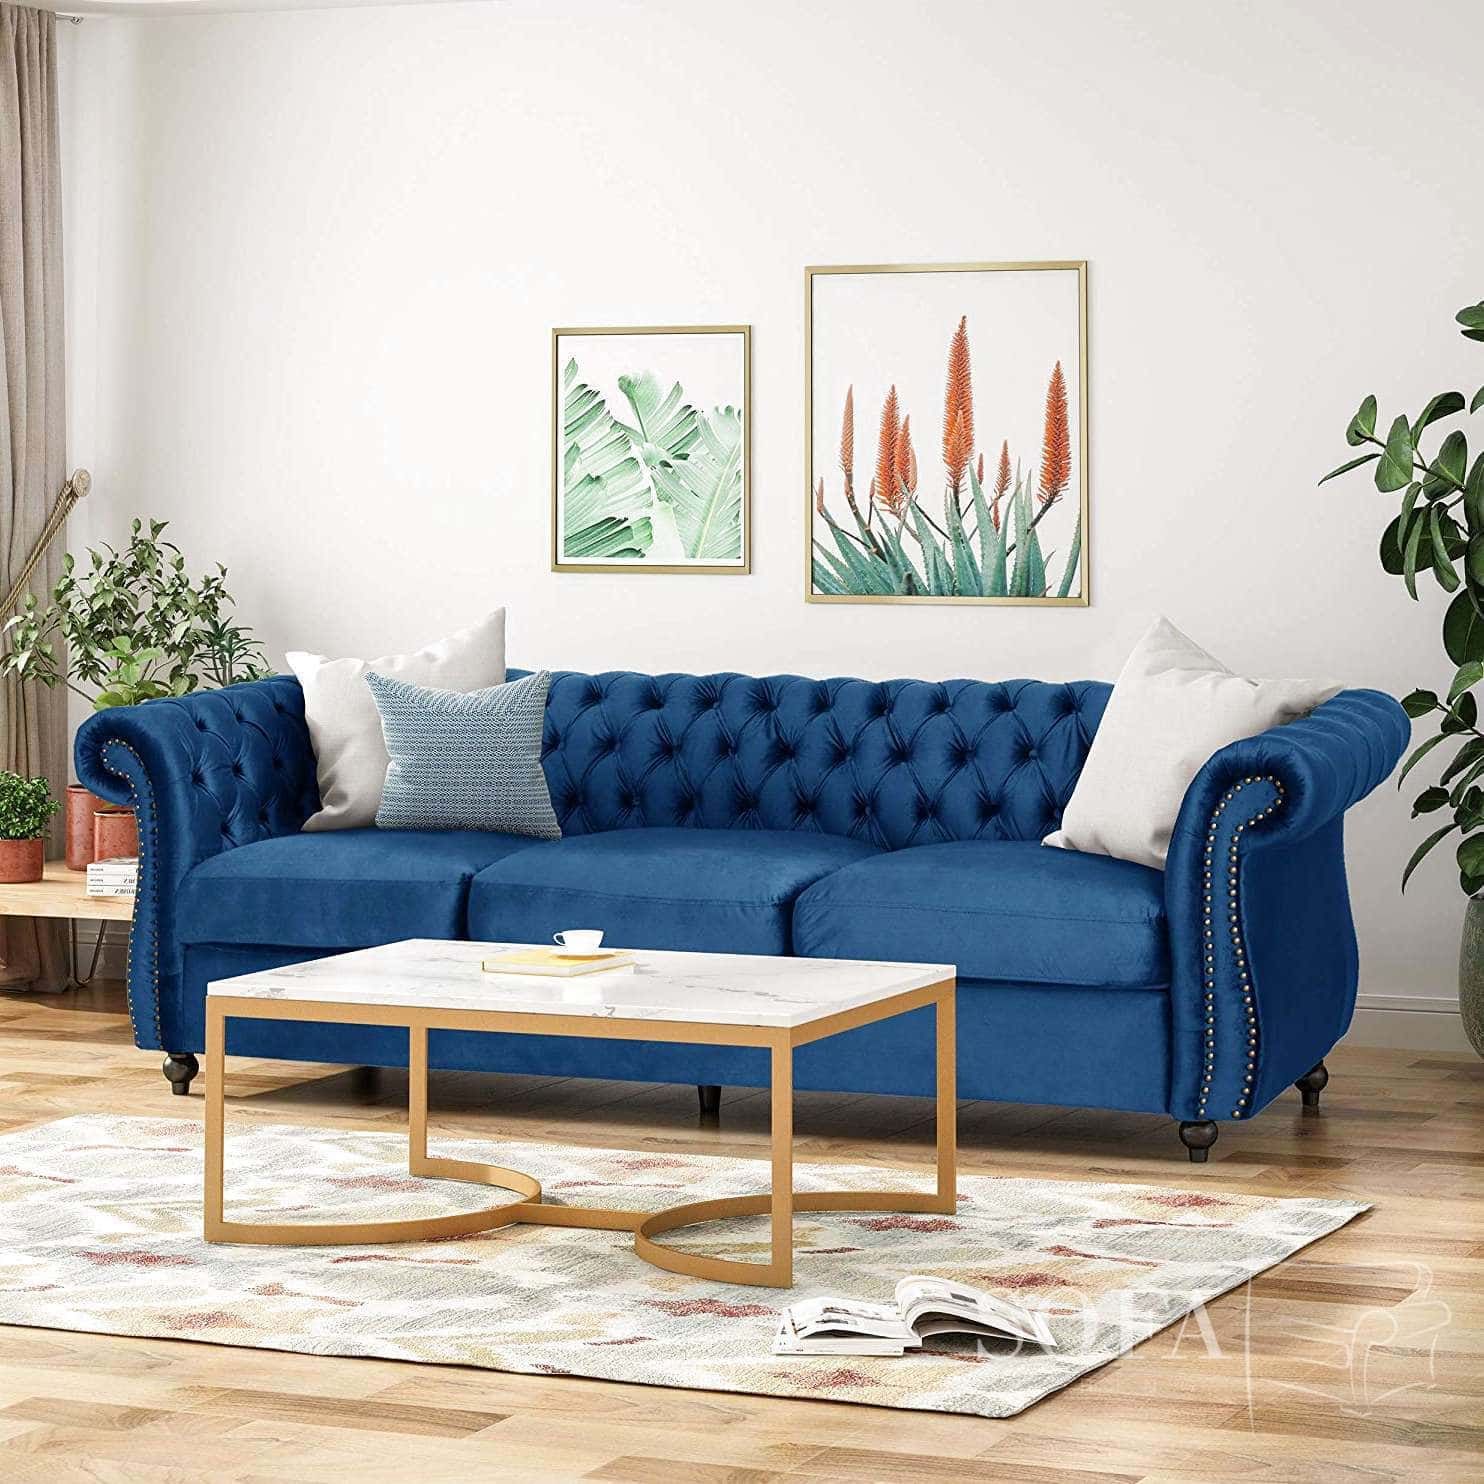 Best Dark Blue Sofas | Our Top 5 High Quality Blue Sofas Inside Sofas In Blue (Gallery 1 of 20)